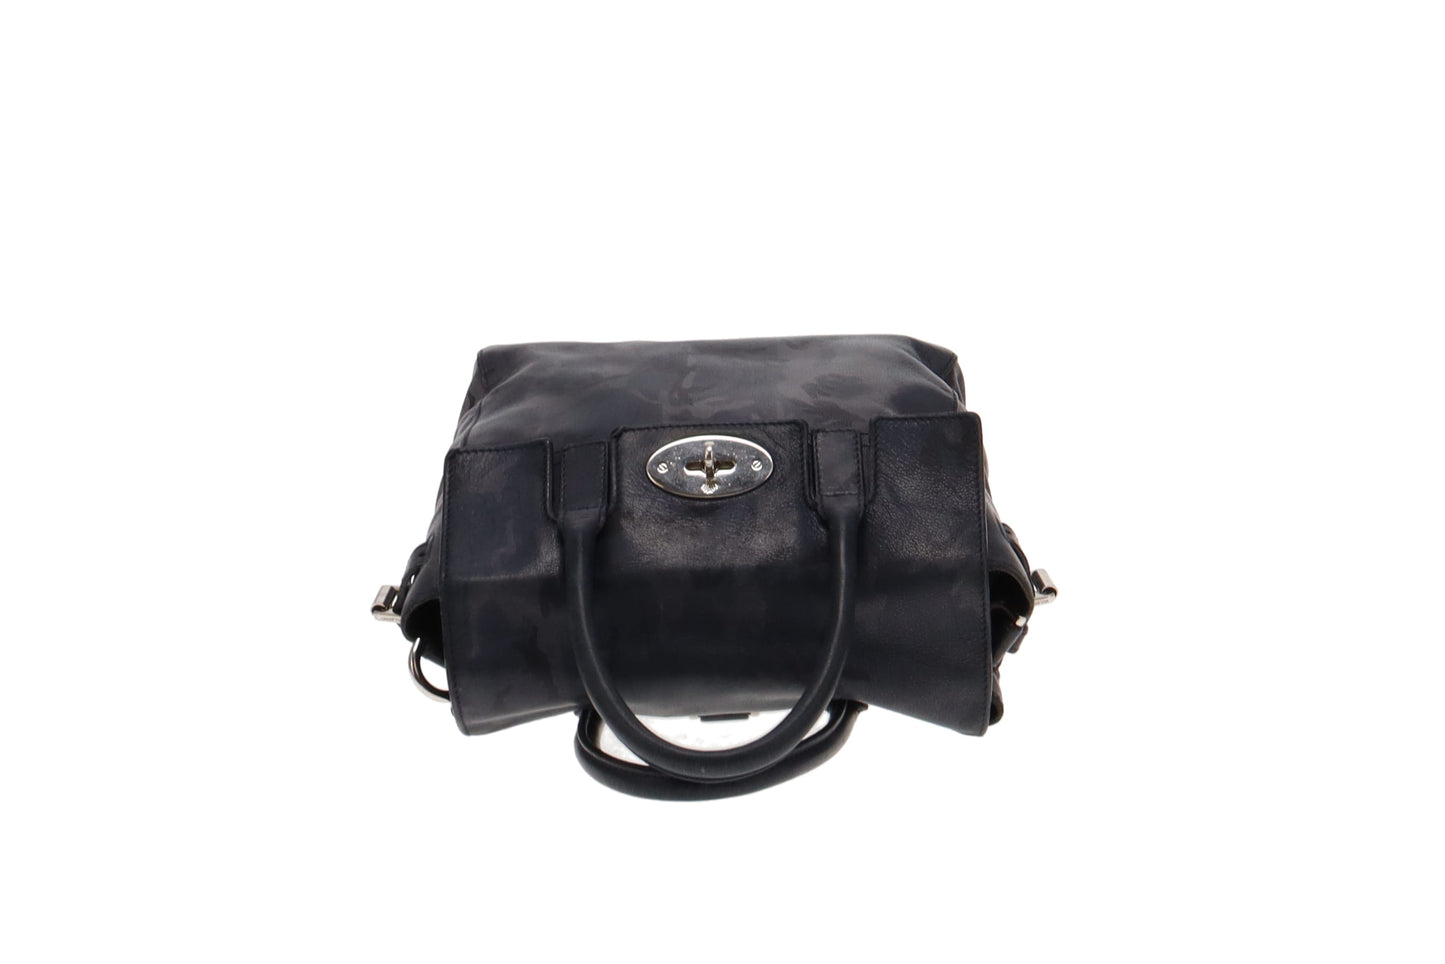 Mulberry Navy Camoflauge Leather Cara Delevigne Backpack